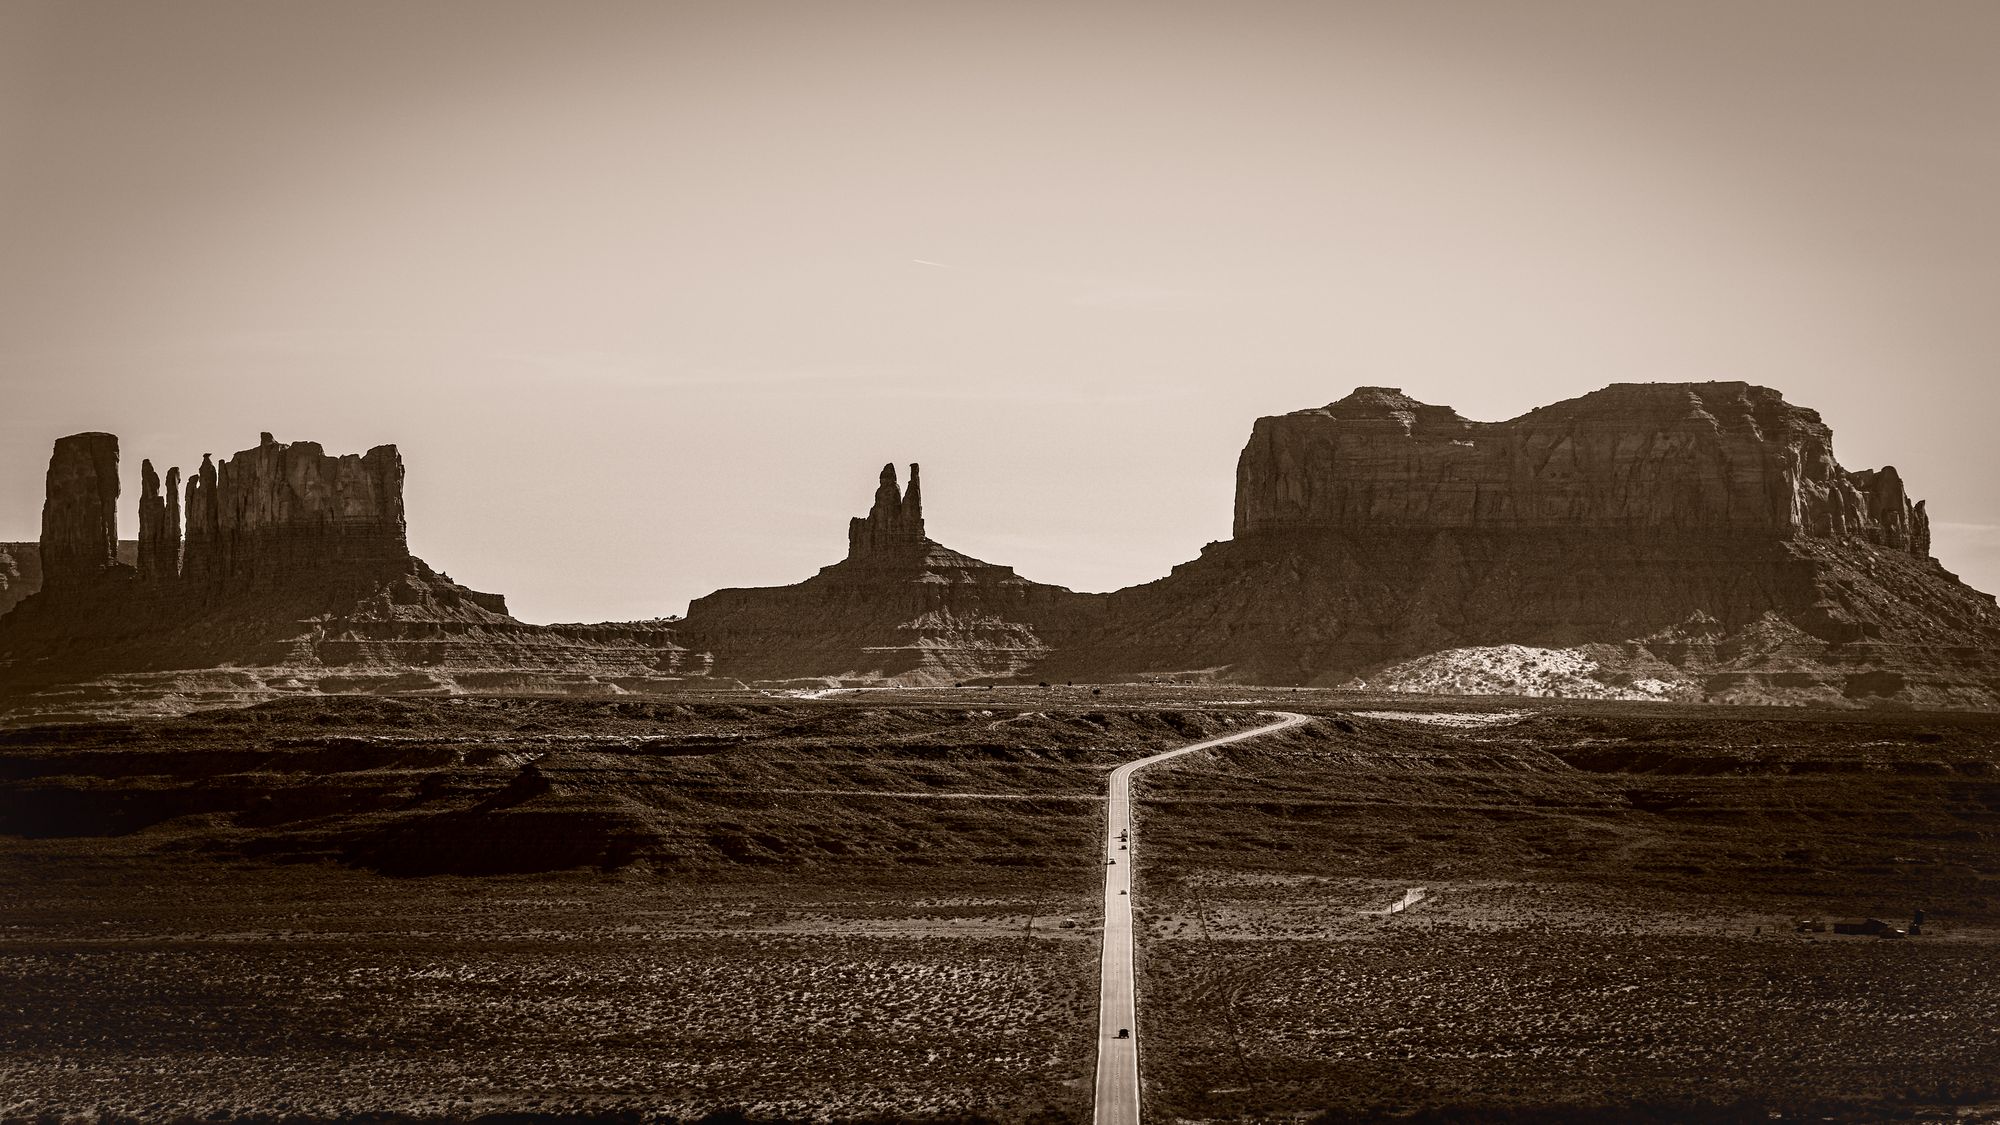 Monument Valley, located in Utah near the Arizona border, is featured in many western movies.